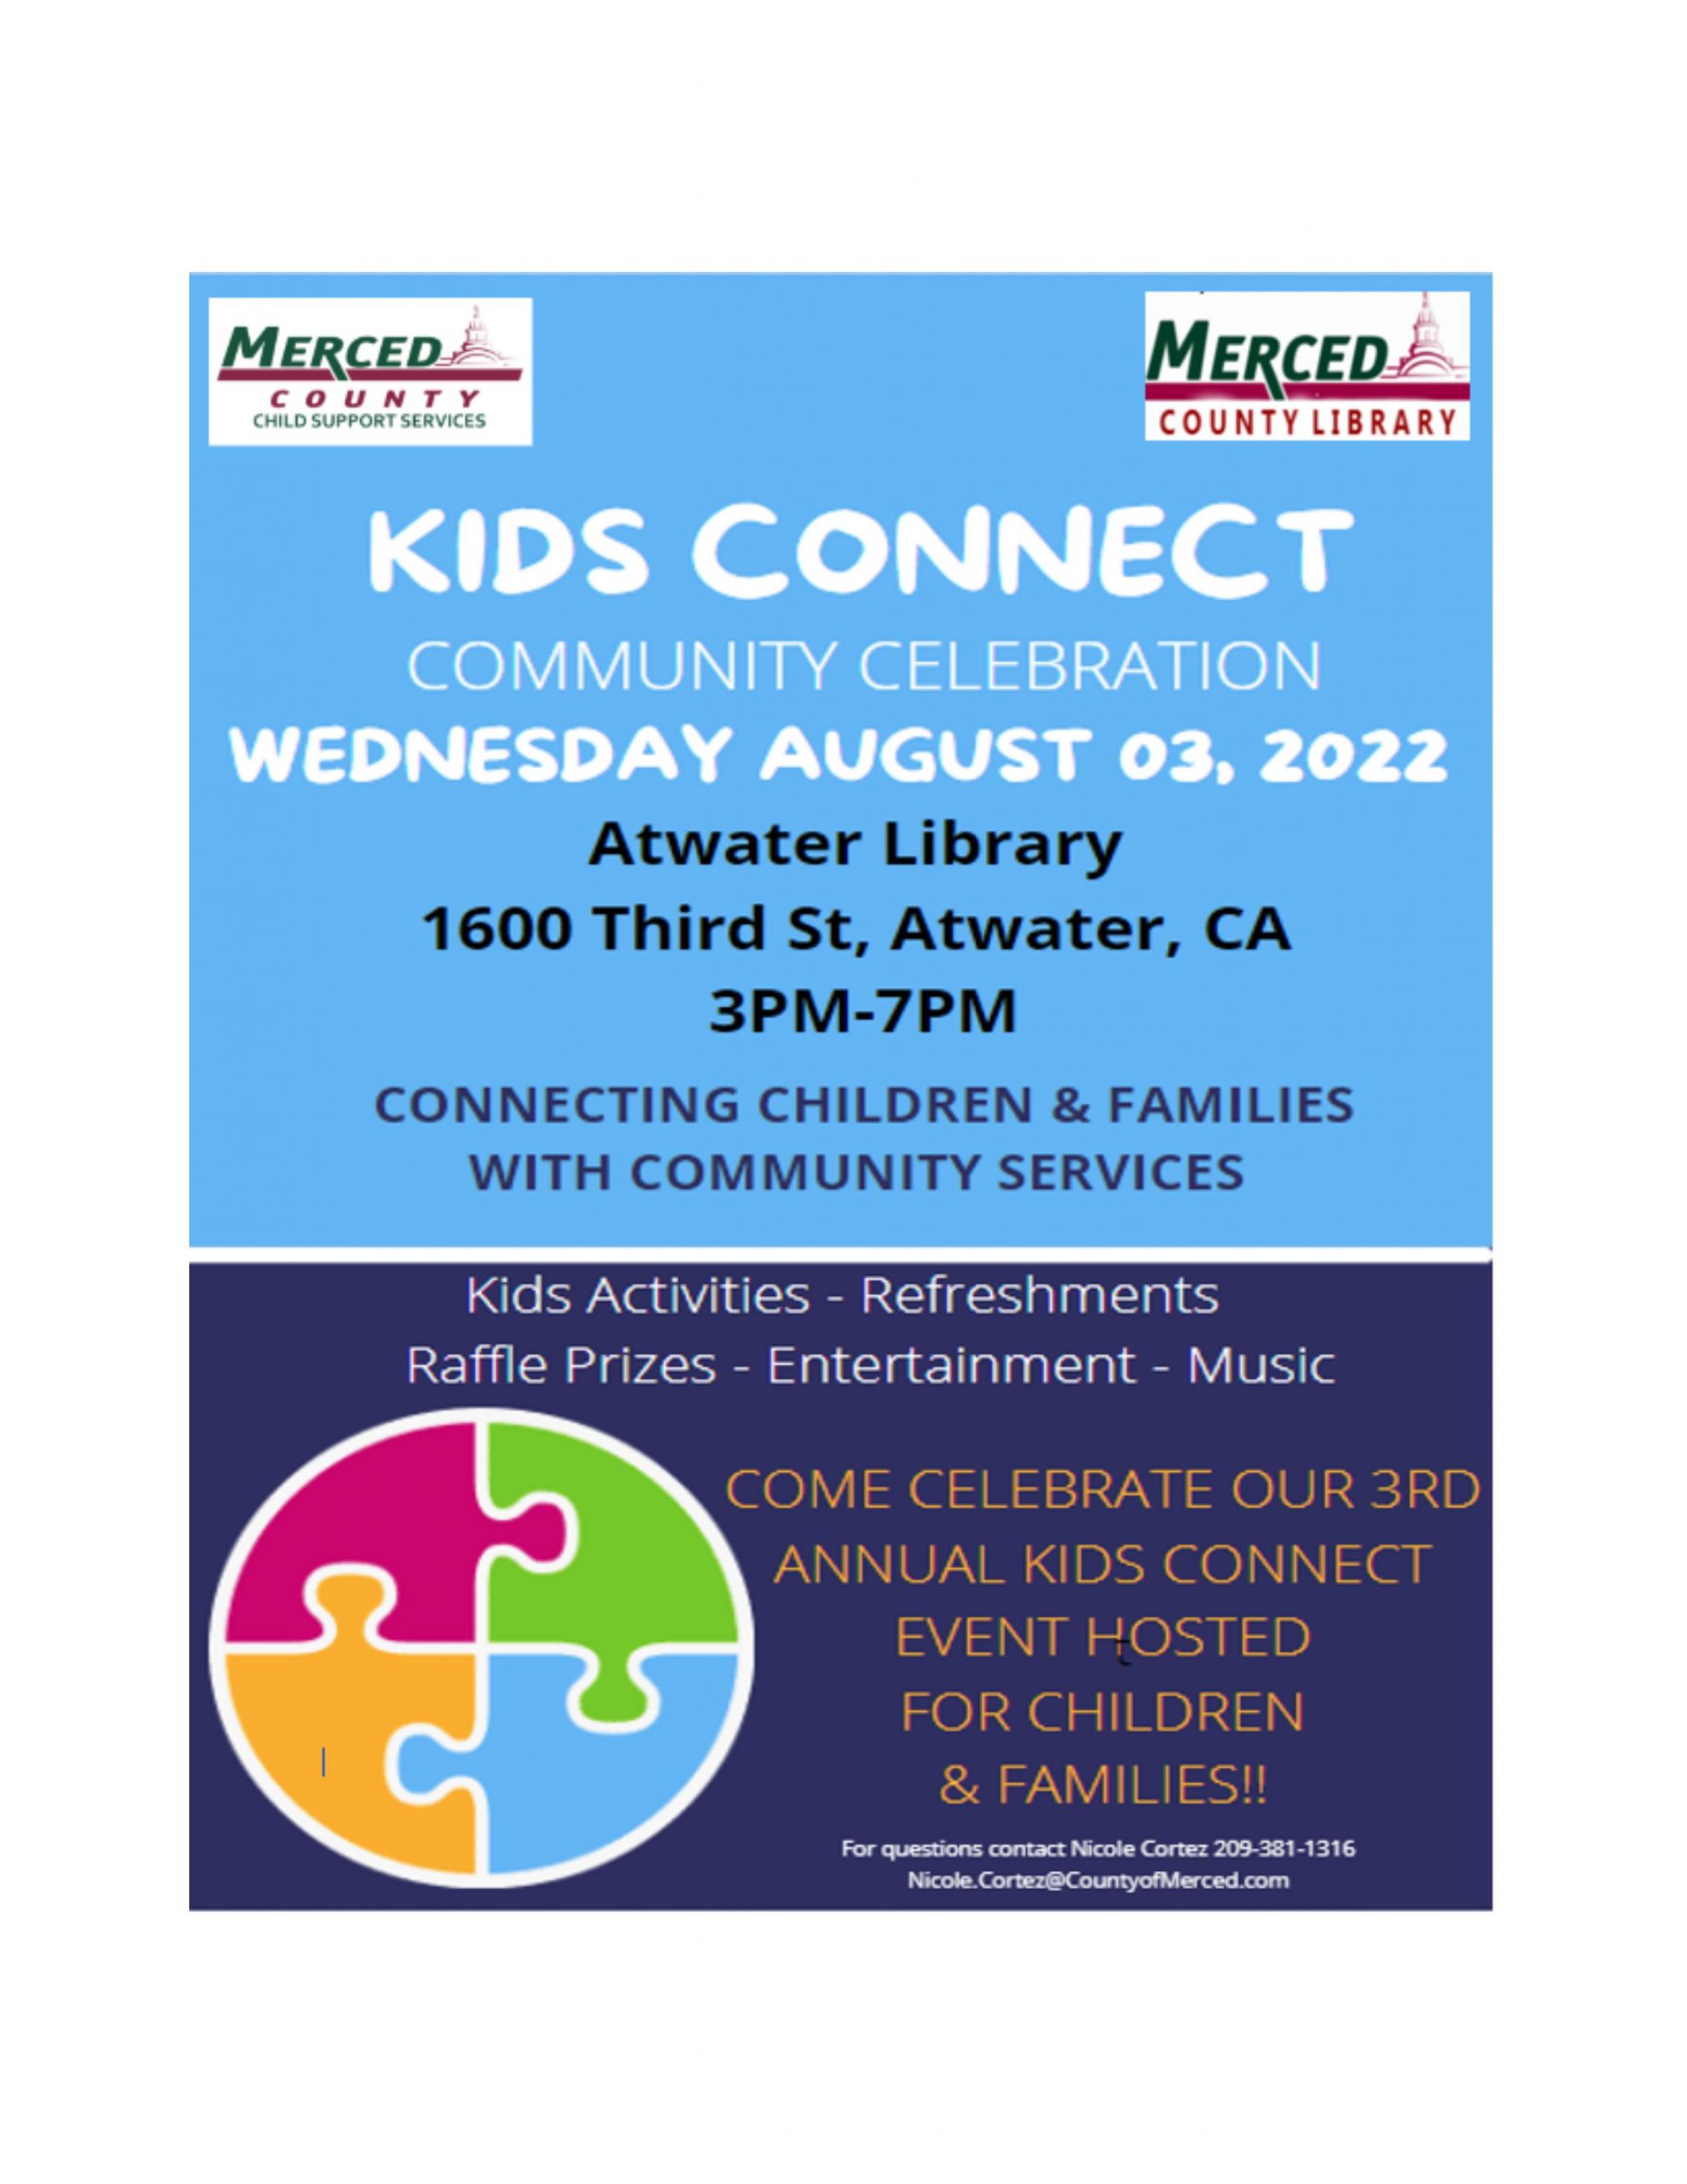  Insight Merced will be at the Merced County Kids Connect Community Celebration